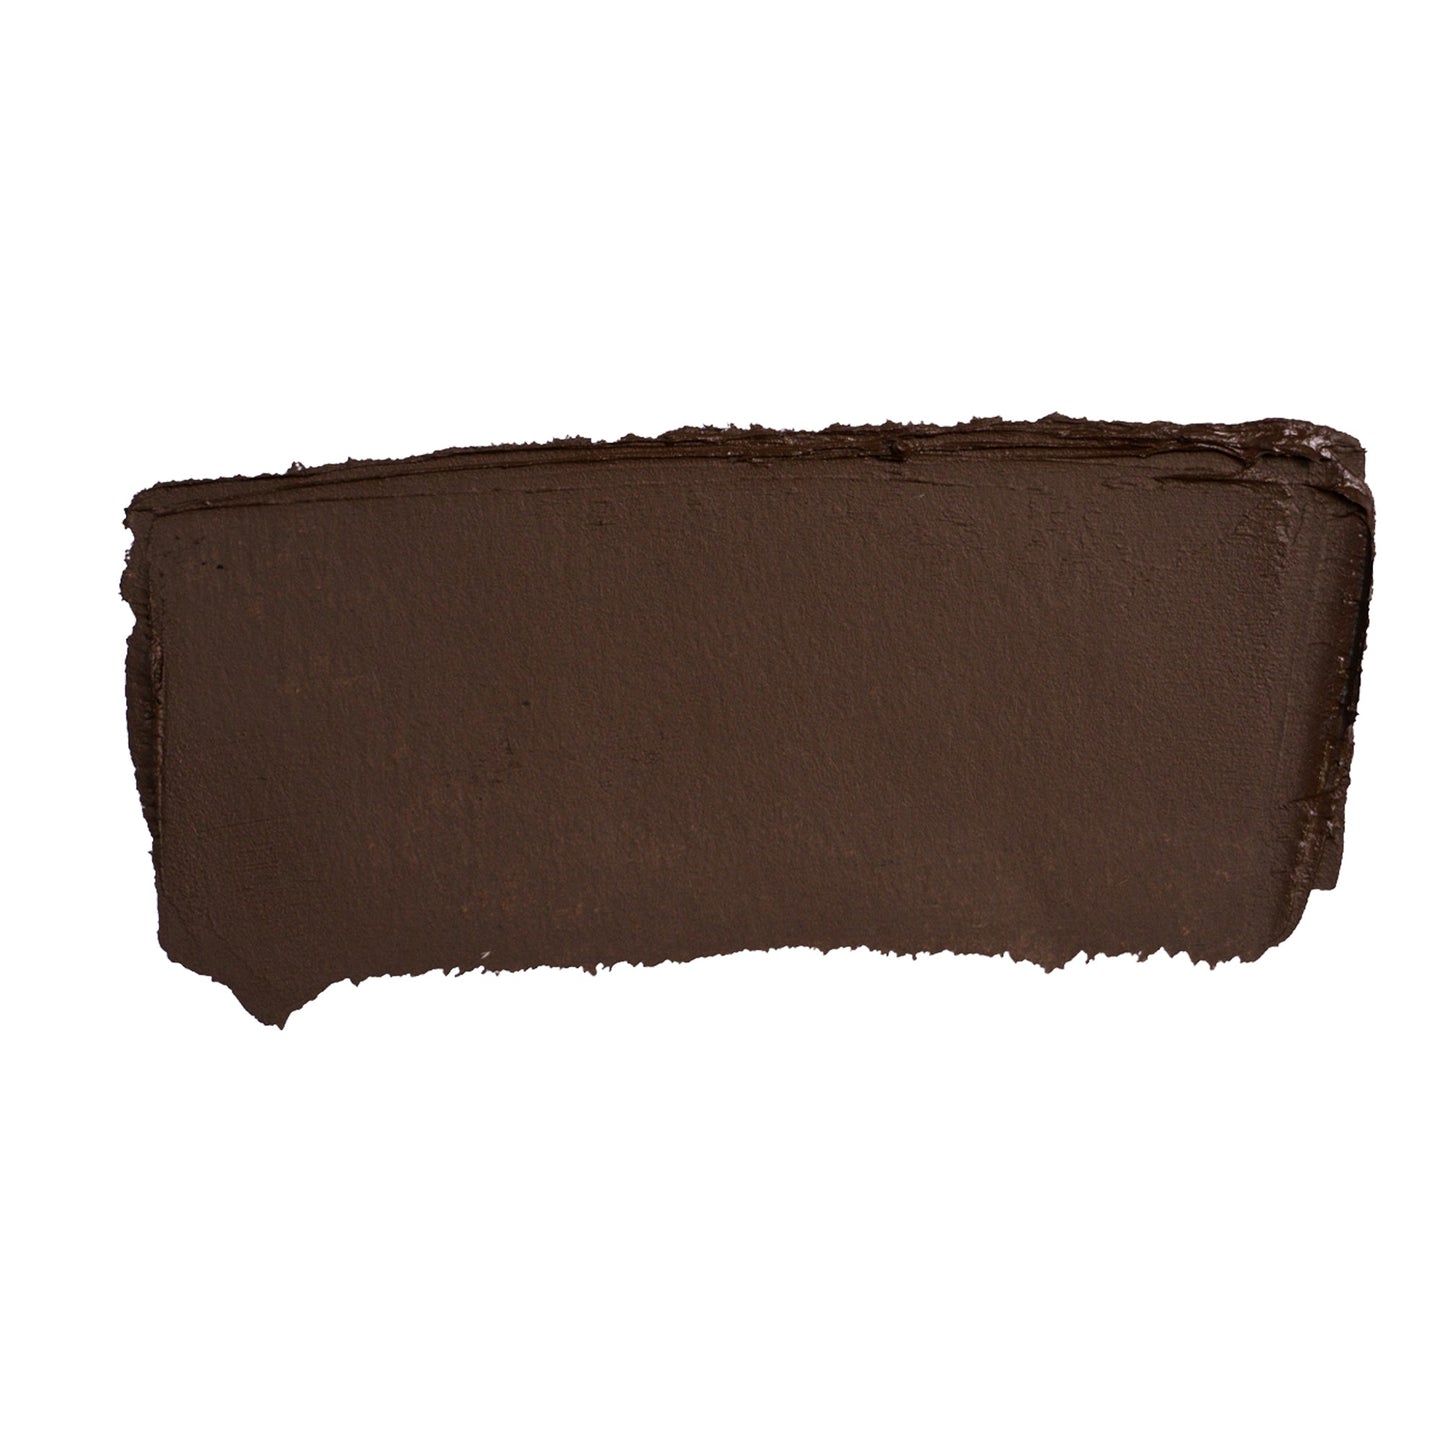 cocoa texture swatch